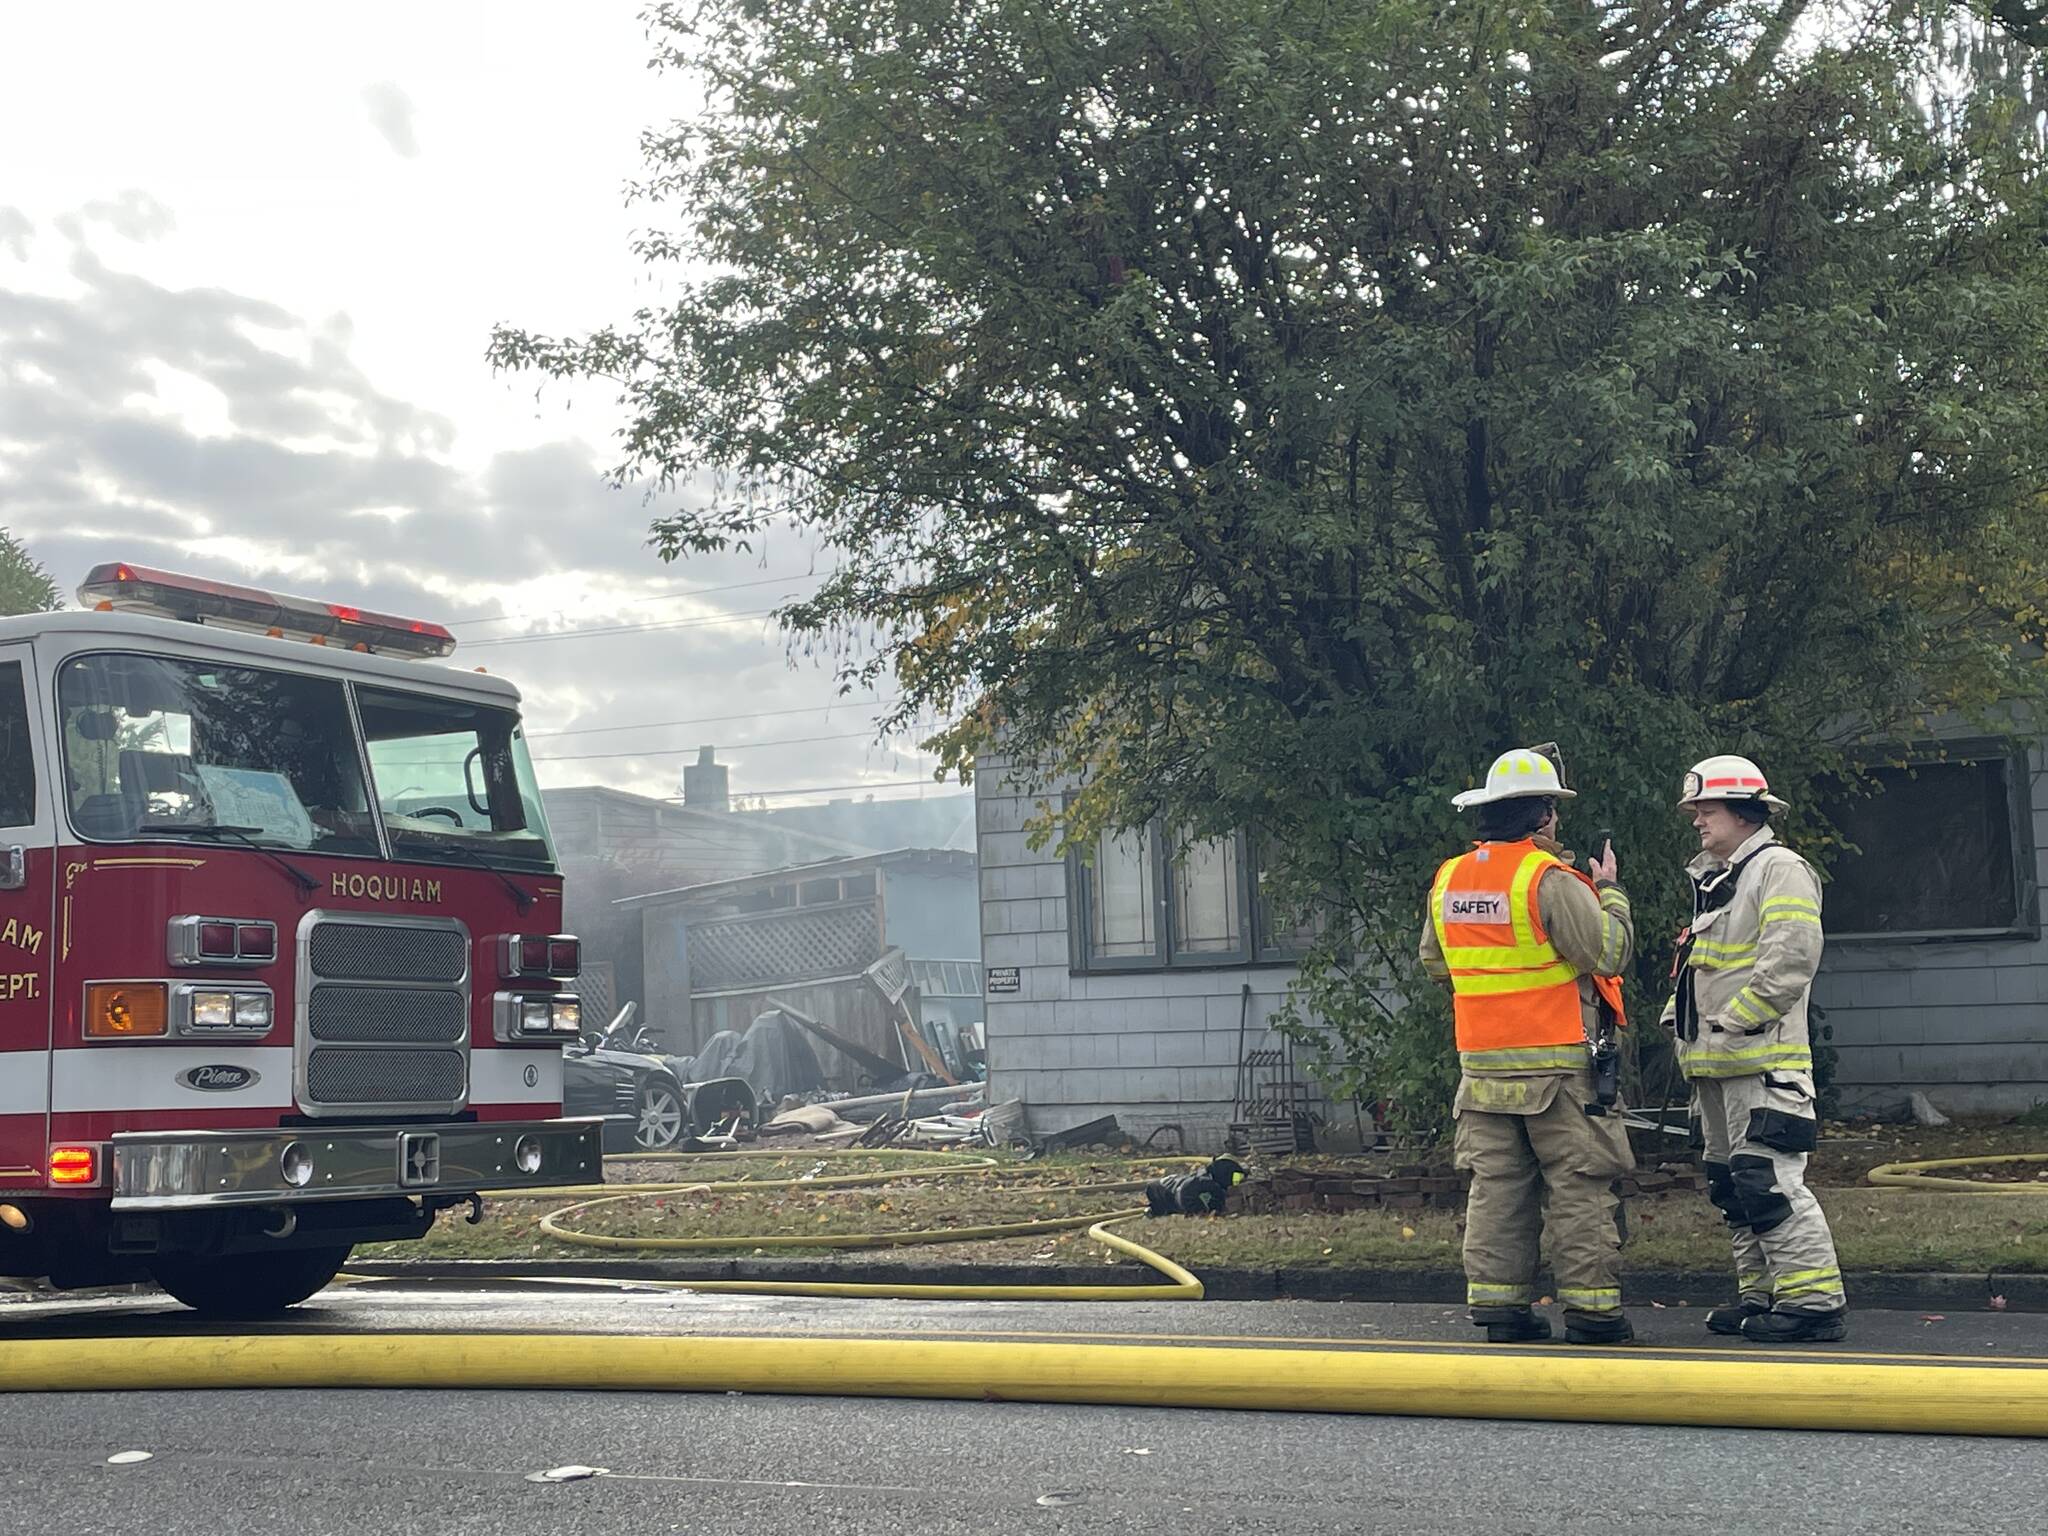 Michael S. Lockett / The Daily World File
Firefighters from the Aberdeen and Hoquiam fire departments confer during the tail end of a response to a fire in Hoquiam on Thursday, Oct. 27, 2022.